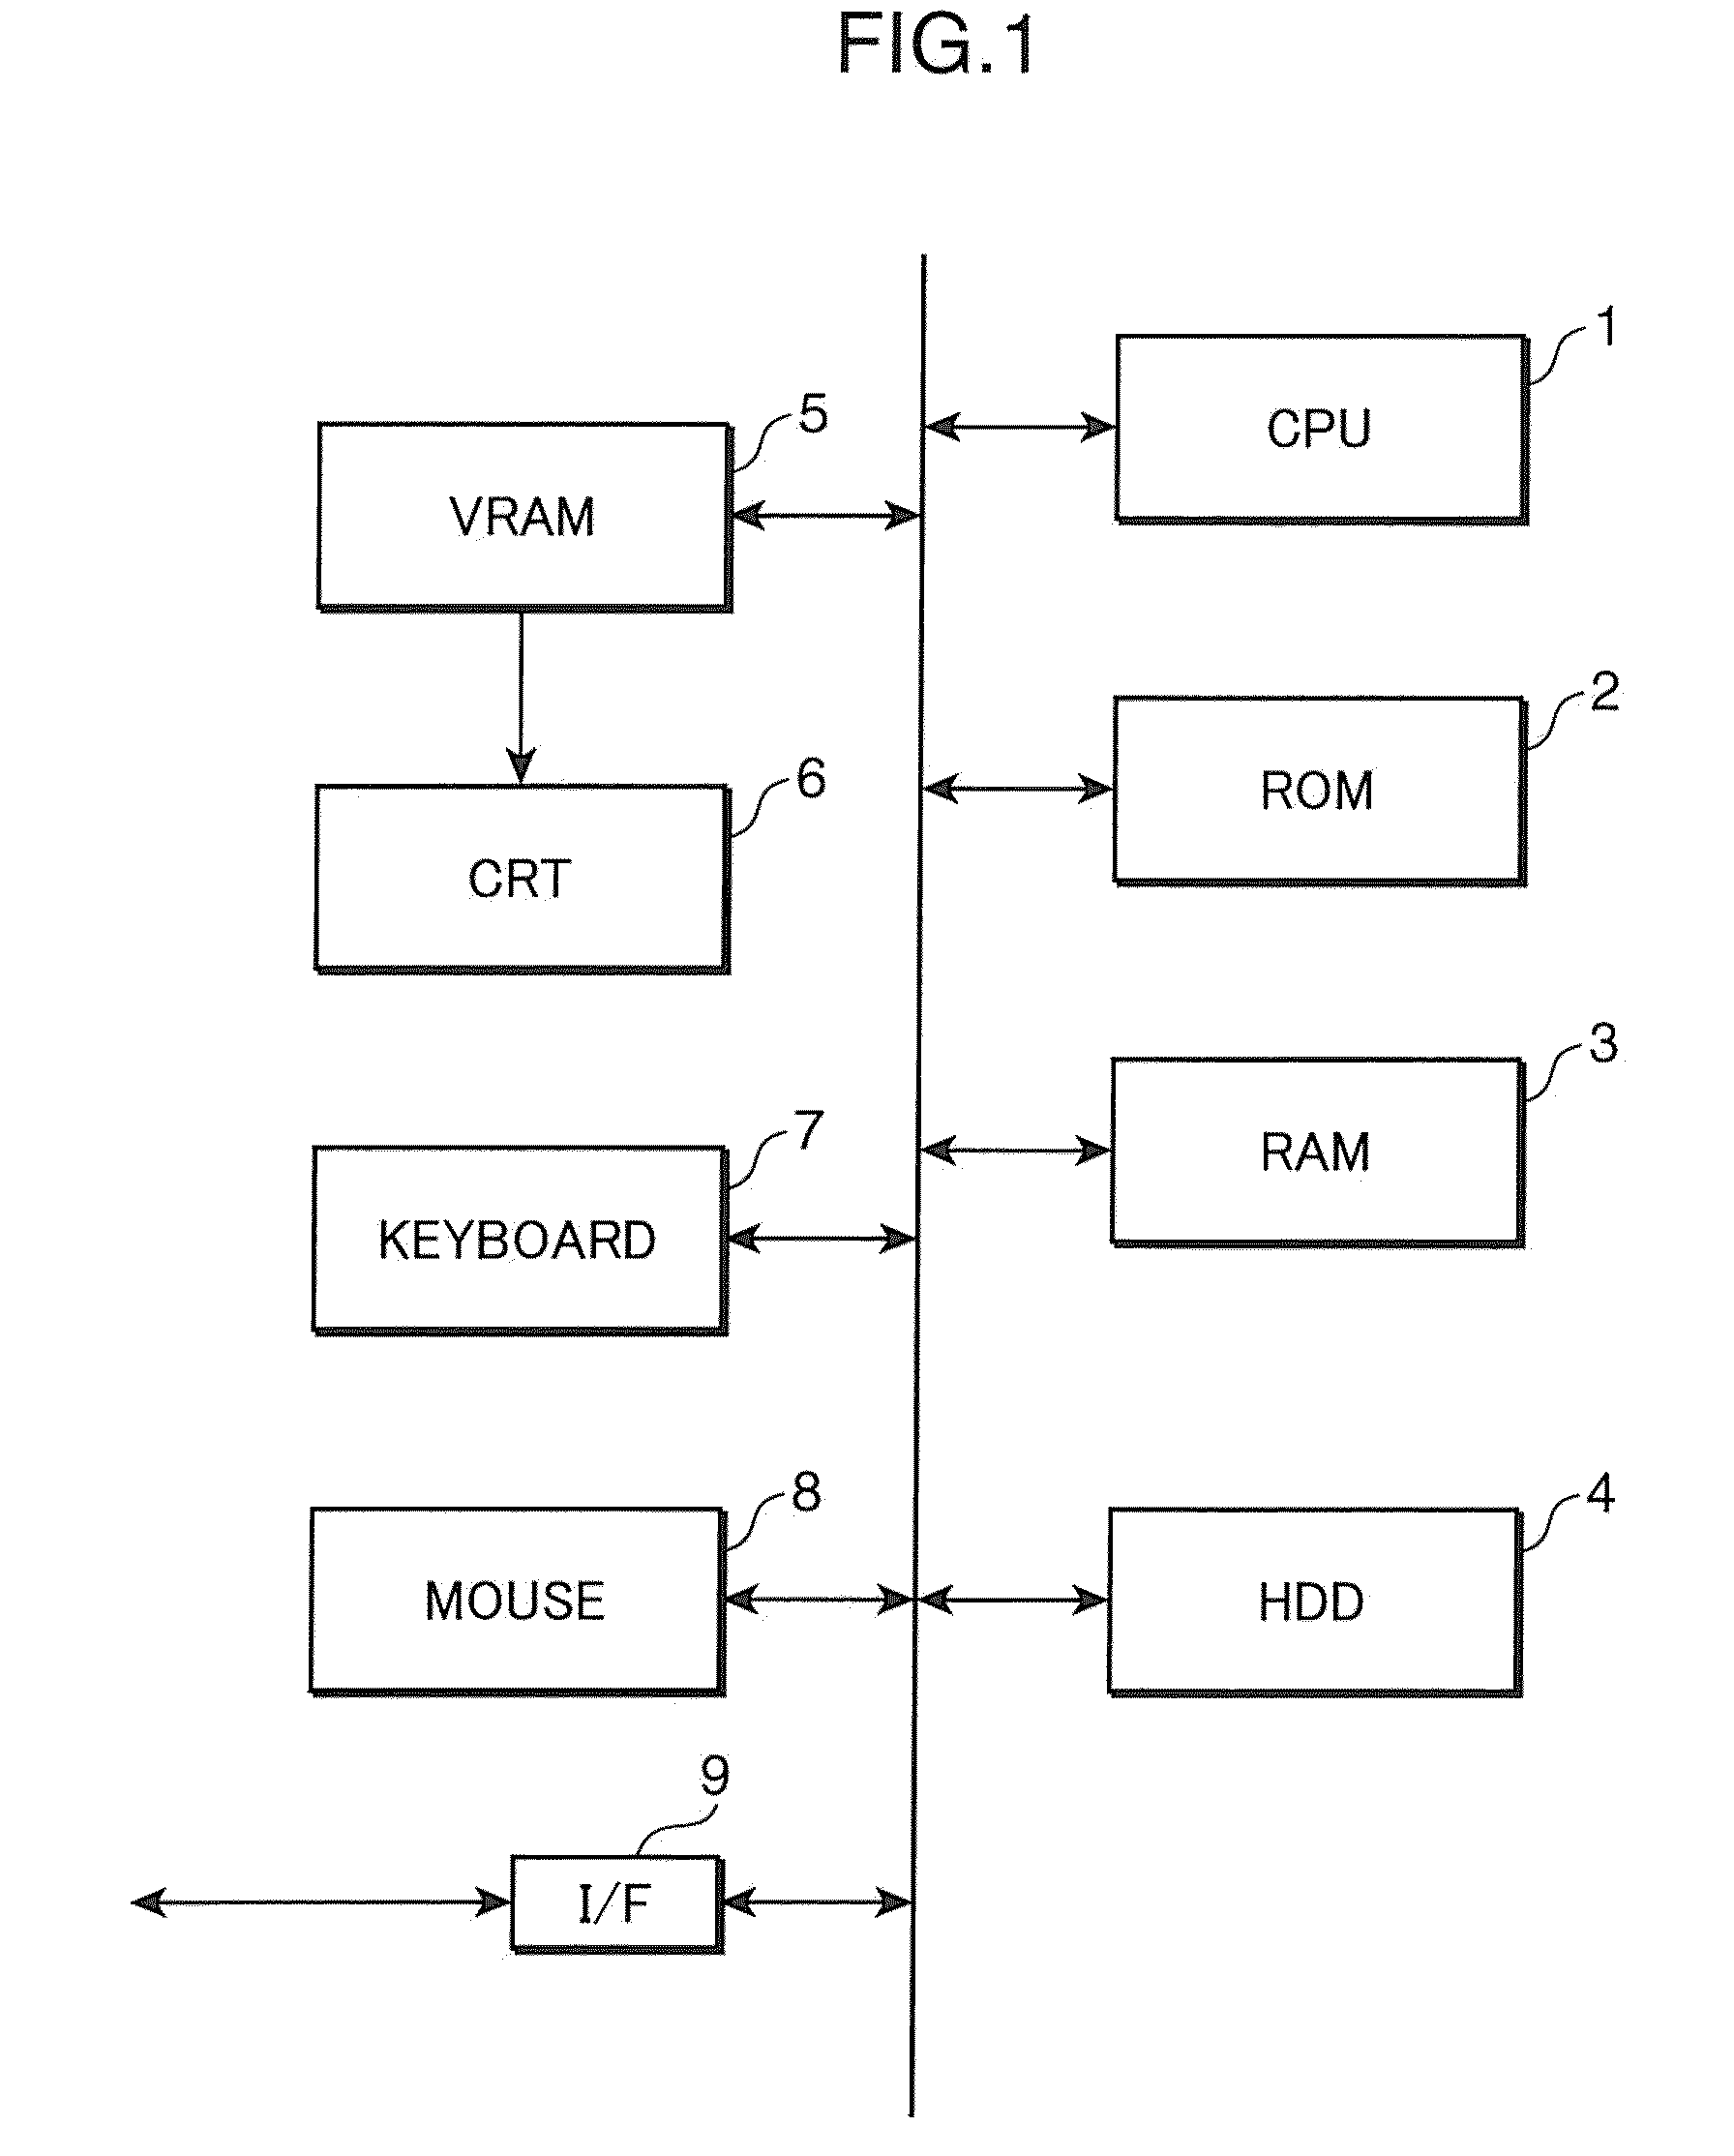 Acoustic analysis apparatus for vehicle